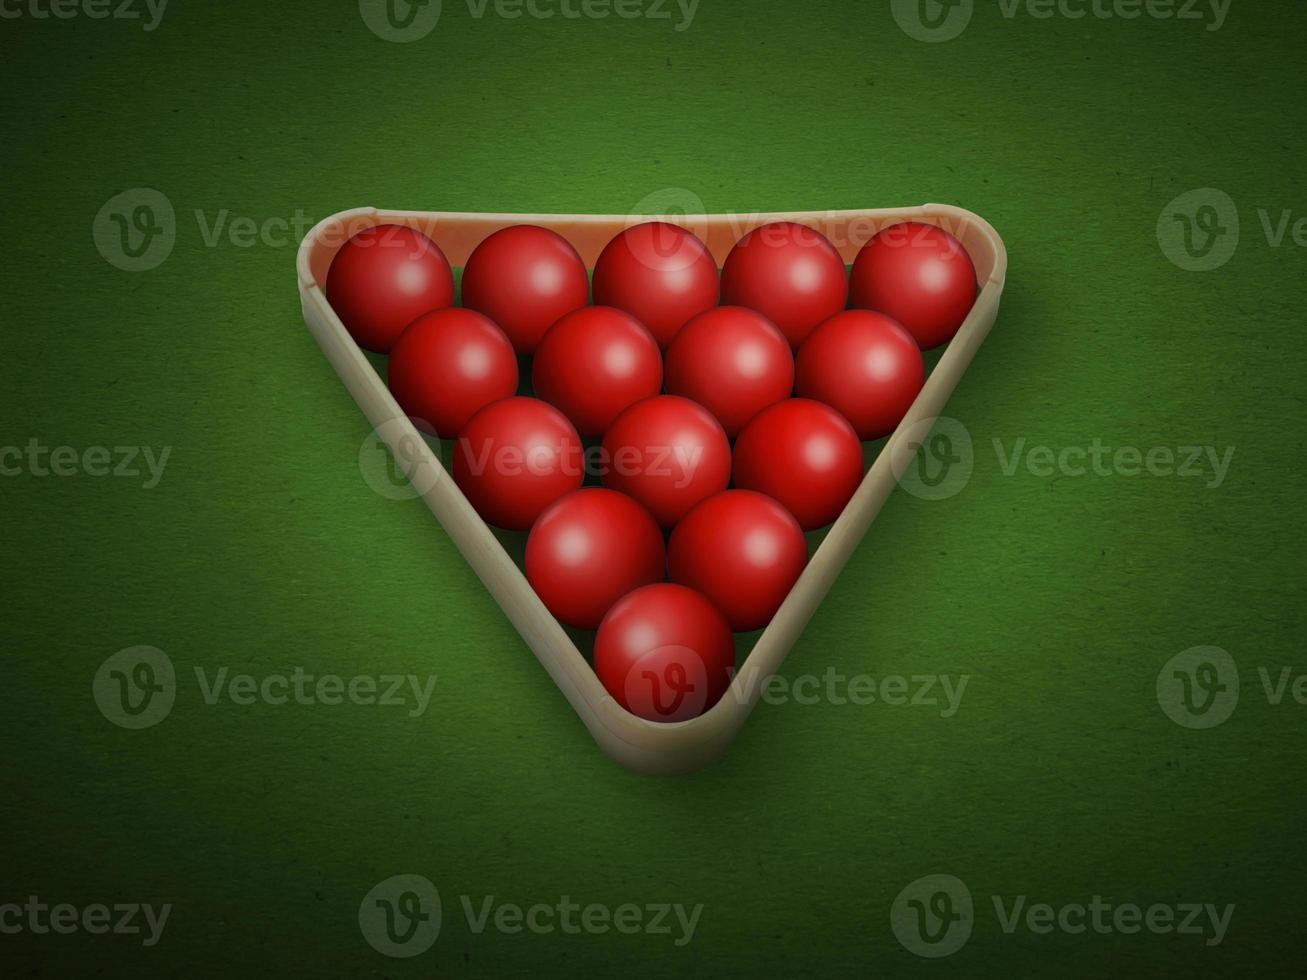 Balls for billiards snooker are on green table, preparation for game photo